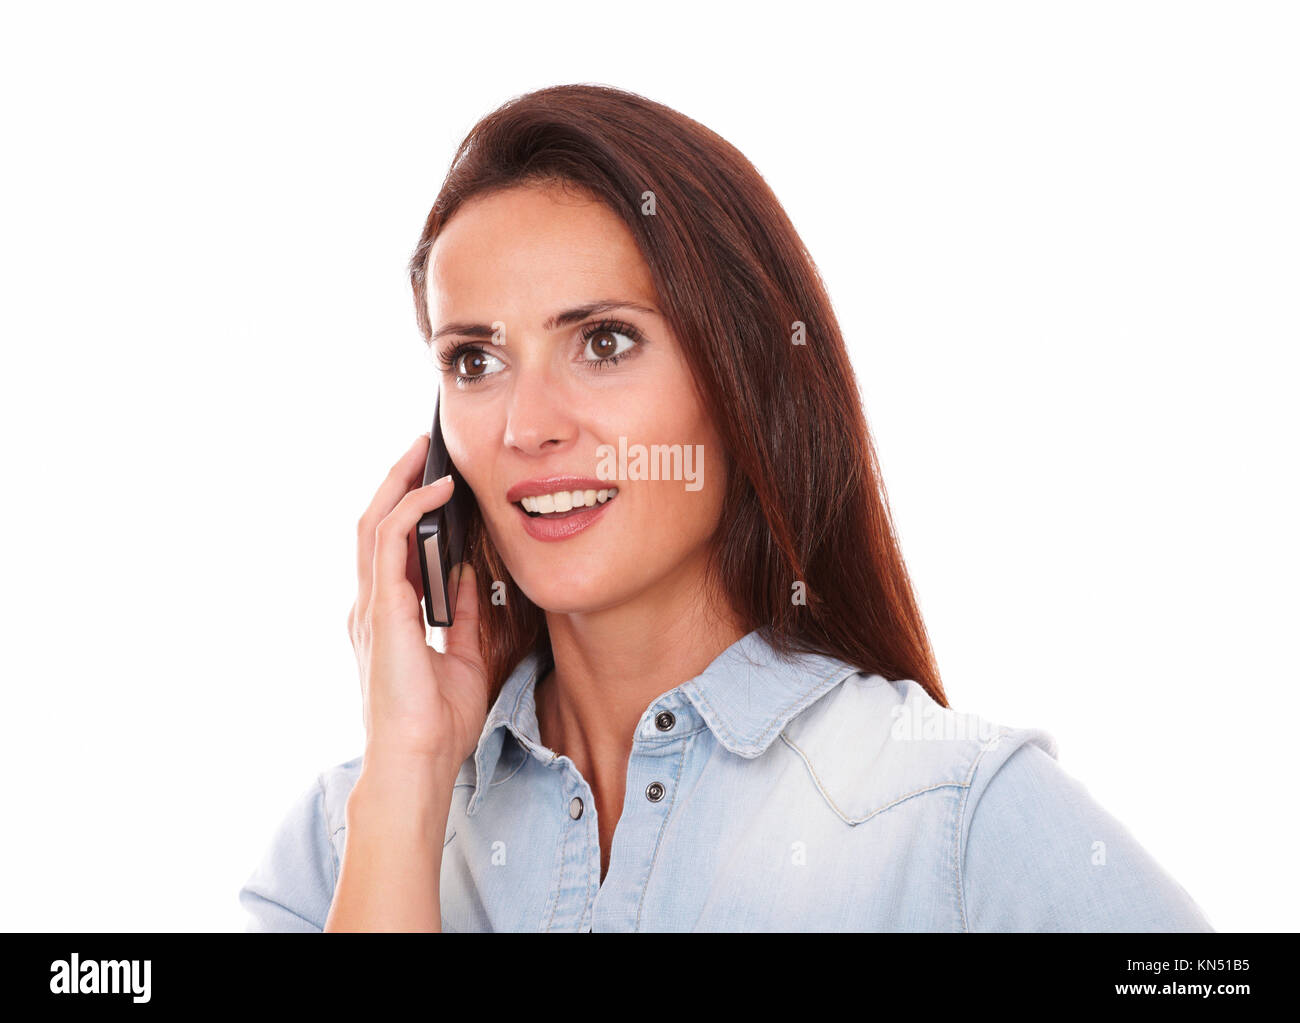 Portrait of pretty single lady on blue shirt speaking on her phone while smiling on isolated studio. Stock Photo